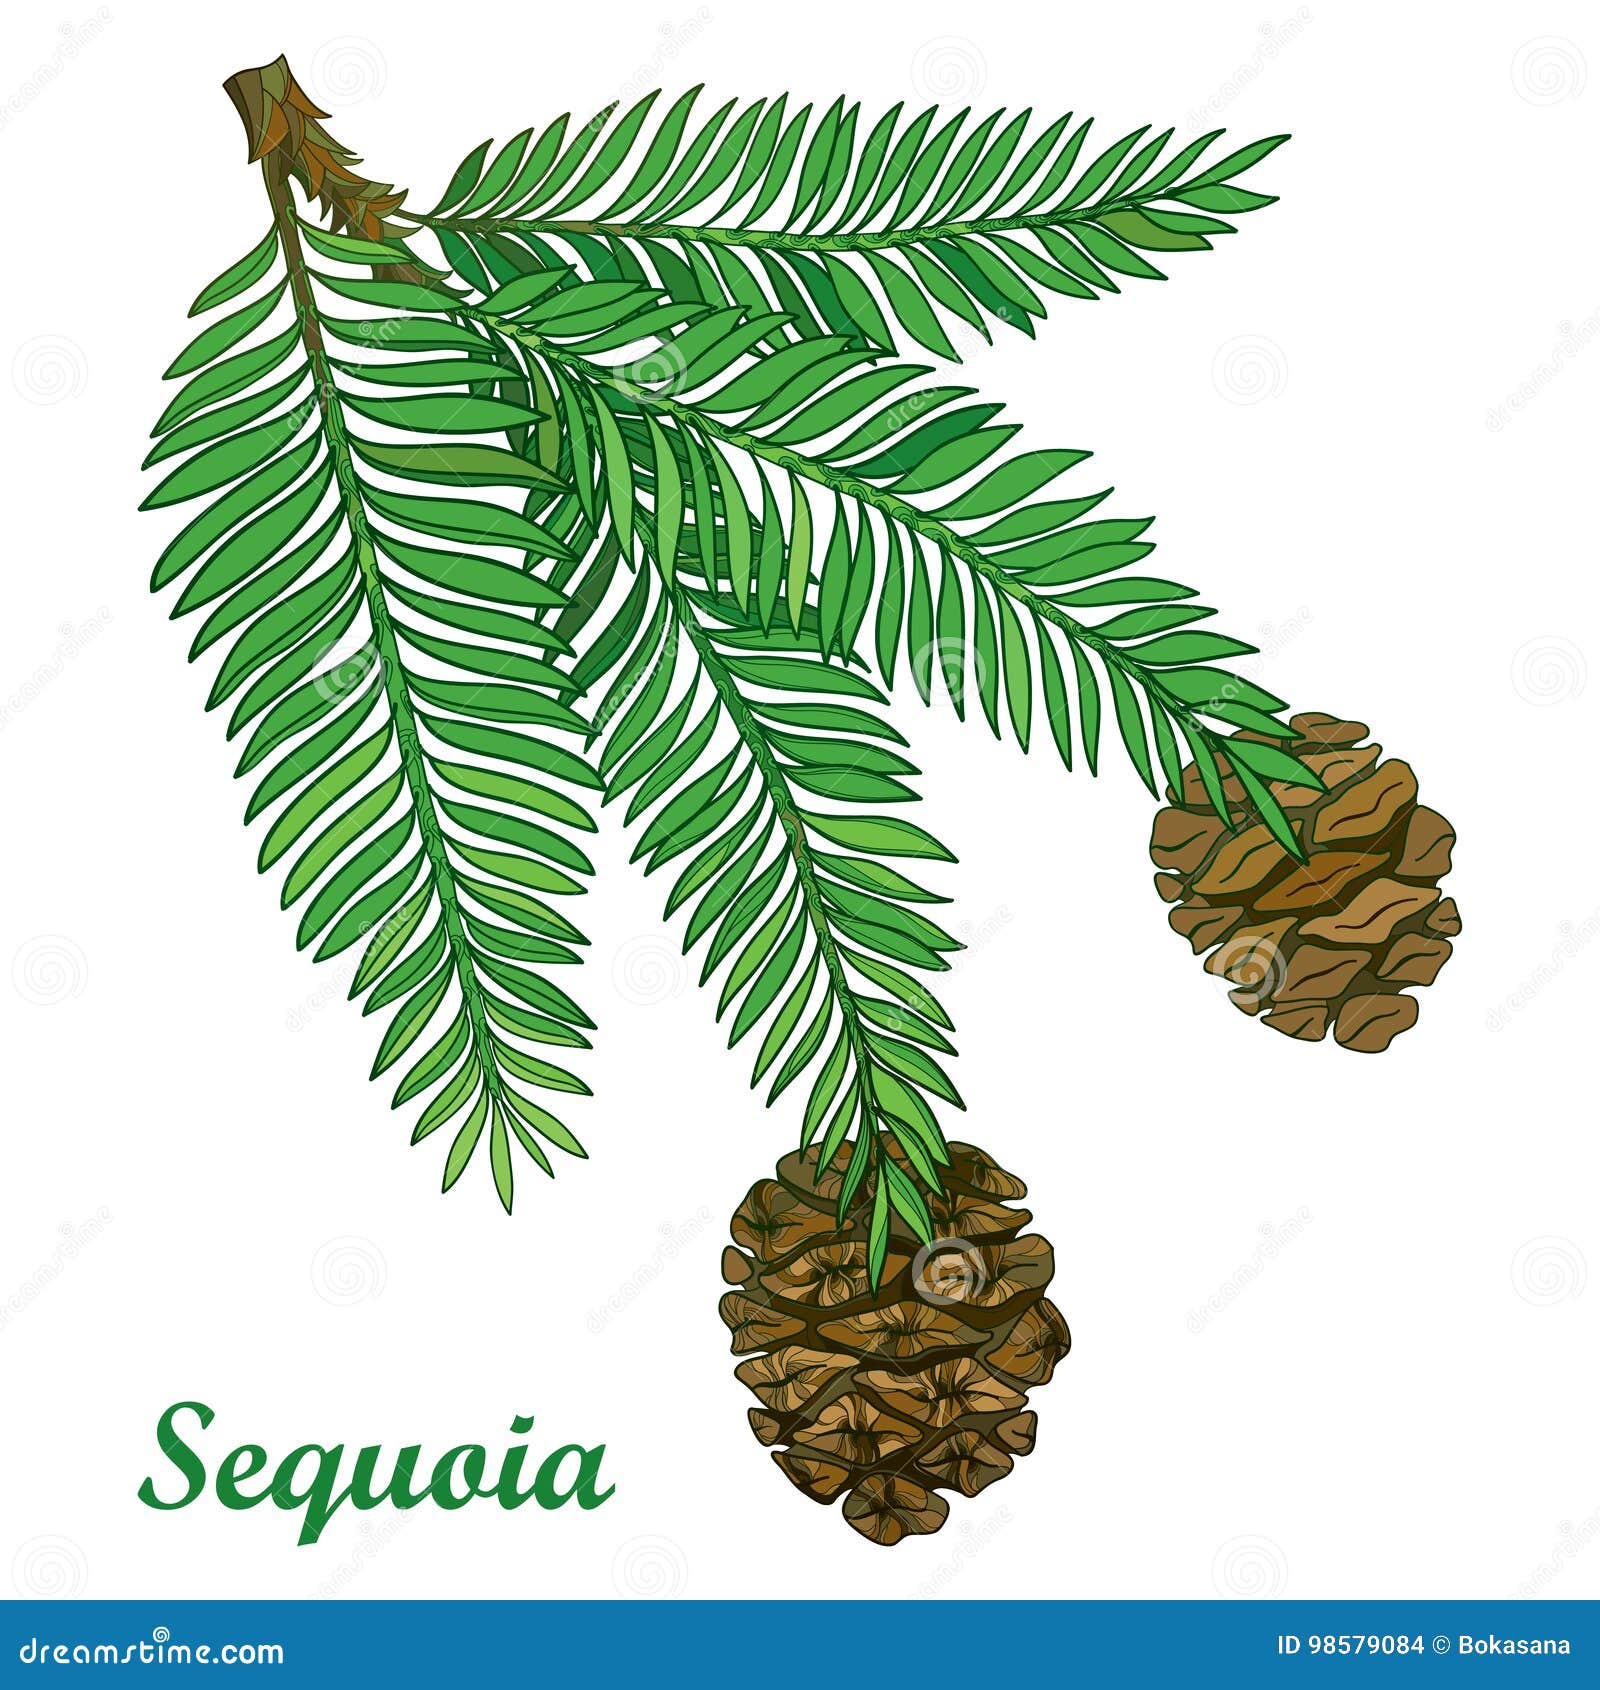  branch with outline sequoia or california redwood  on white background. coniferous tree branch with pine and cones.